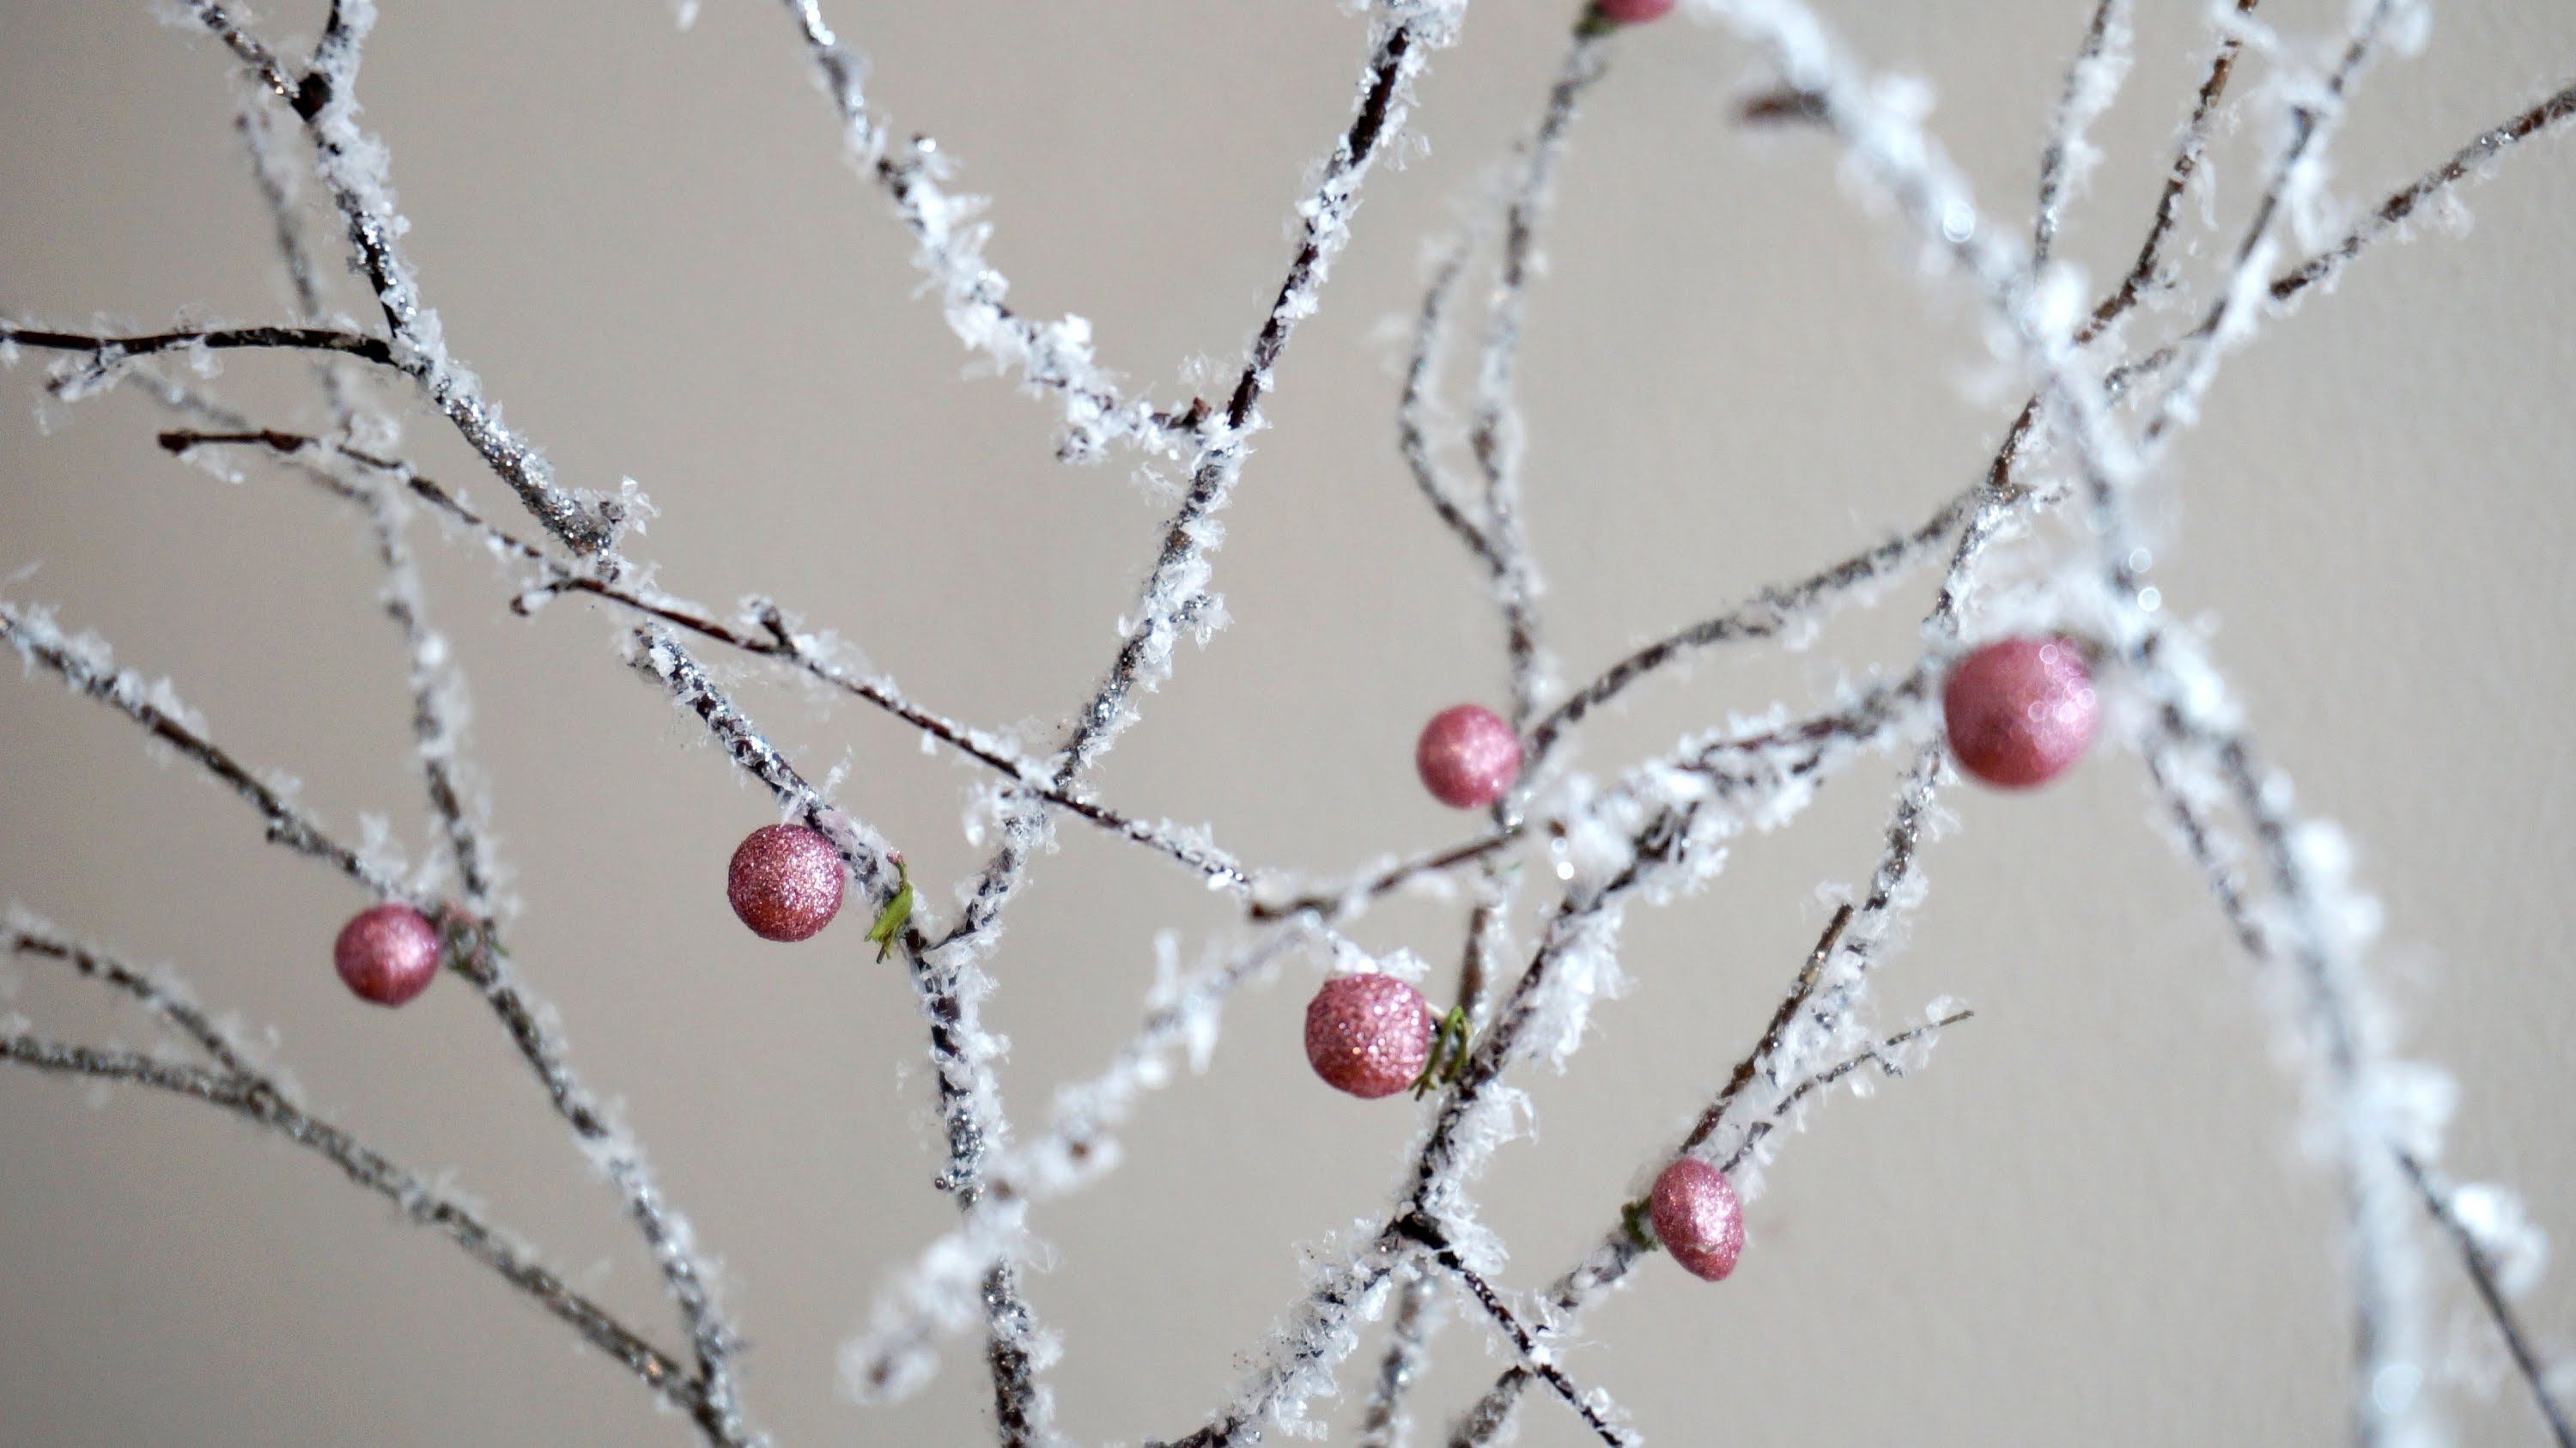 How to make your own snowy branches - YouTube